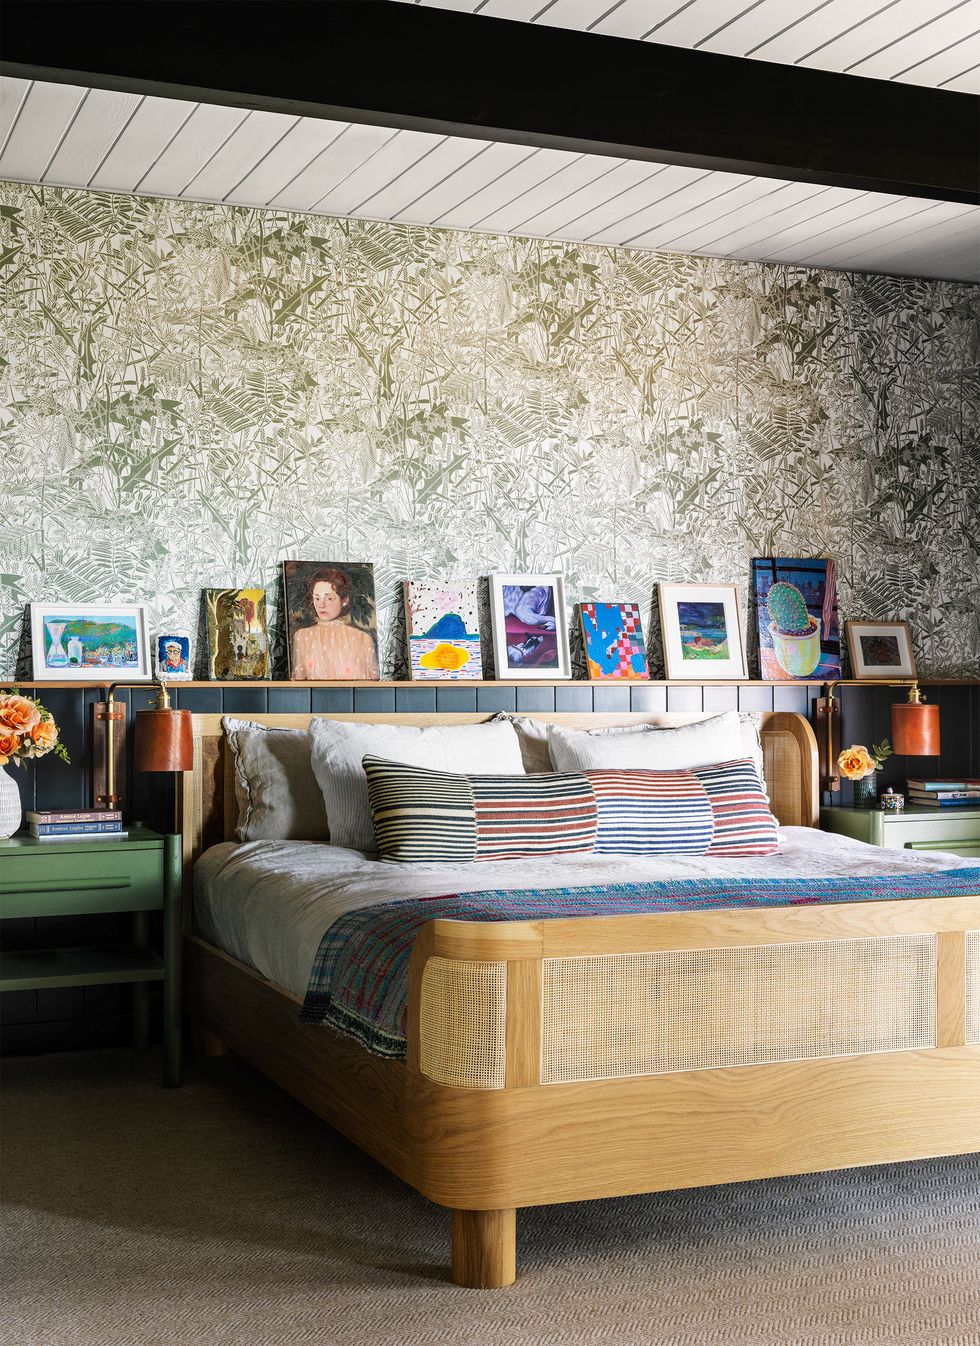 The master bedroom bed has a curved wooden frame with long striped decorative pillows, green nightstands on either side, and artwork on a wainscot shelf against a backdrop of leaf-patterned wallpaper. I am.